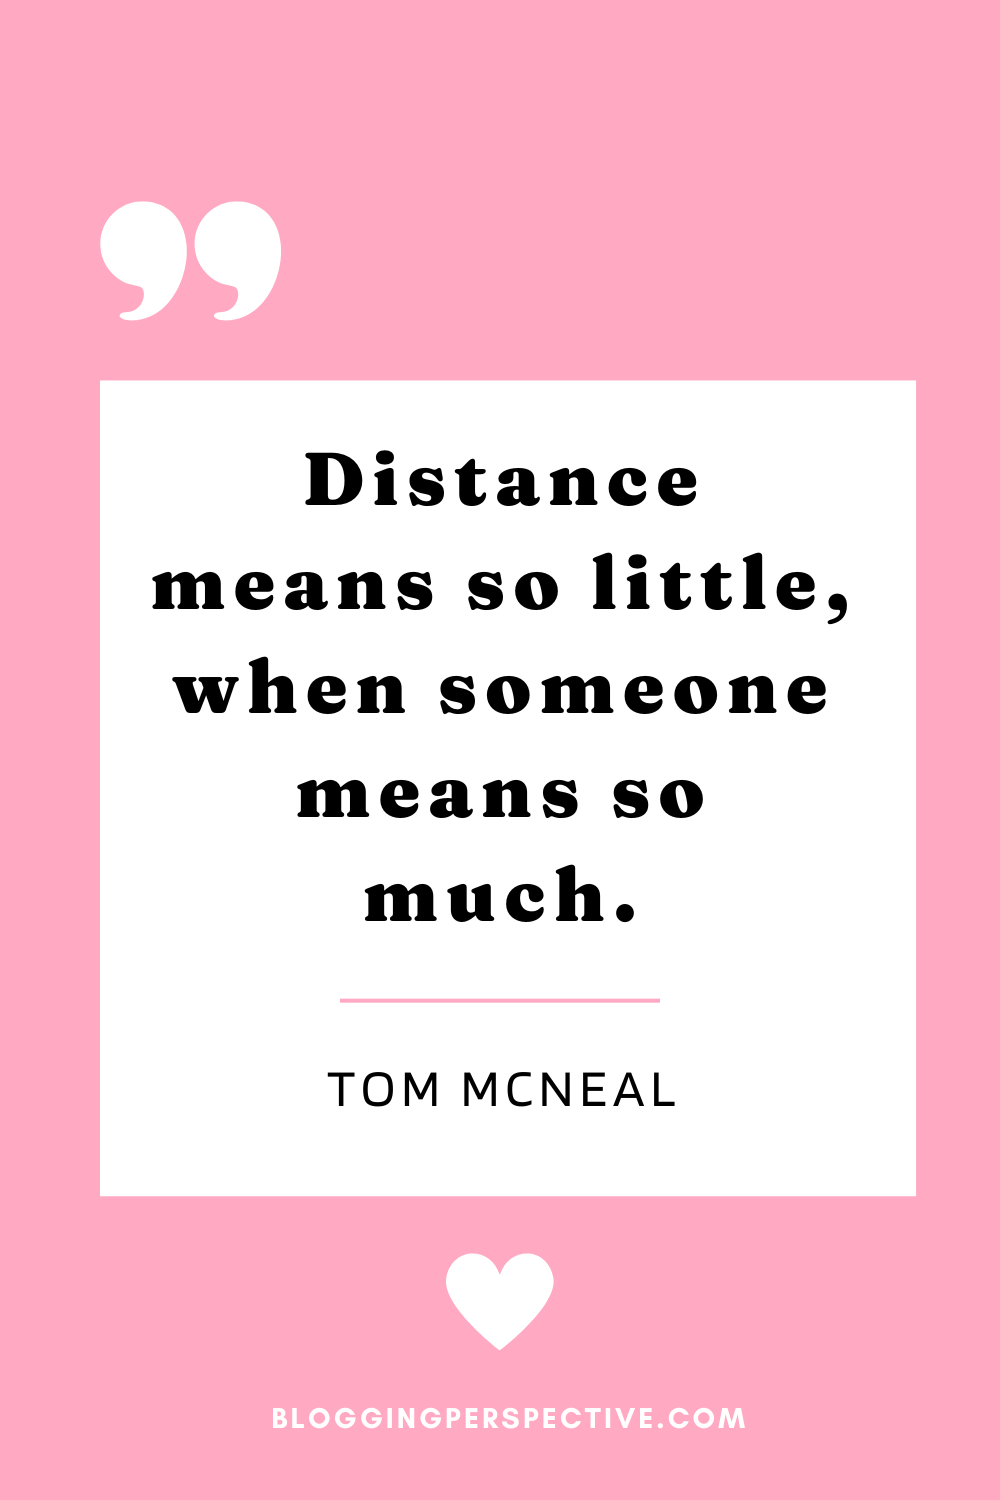 Distance means so little, when someone means so much